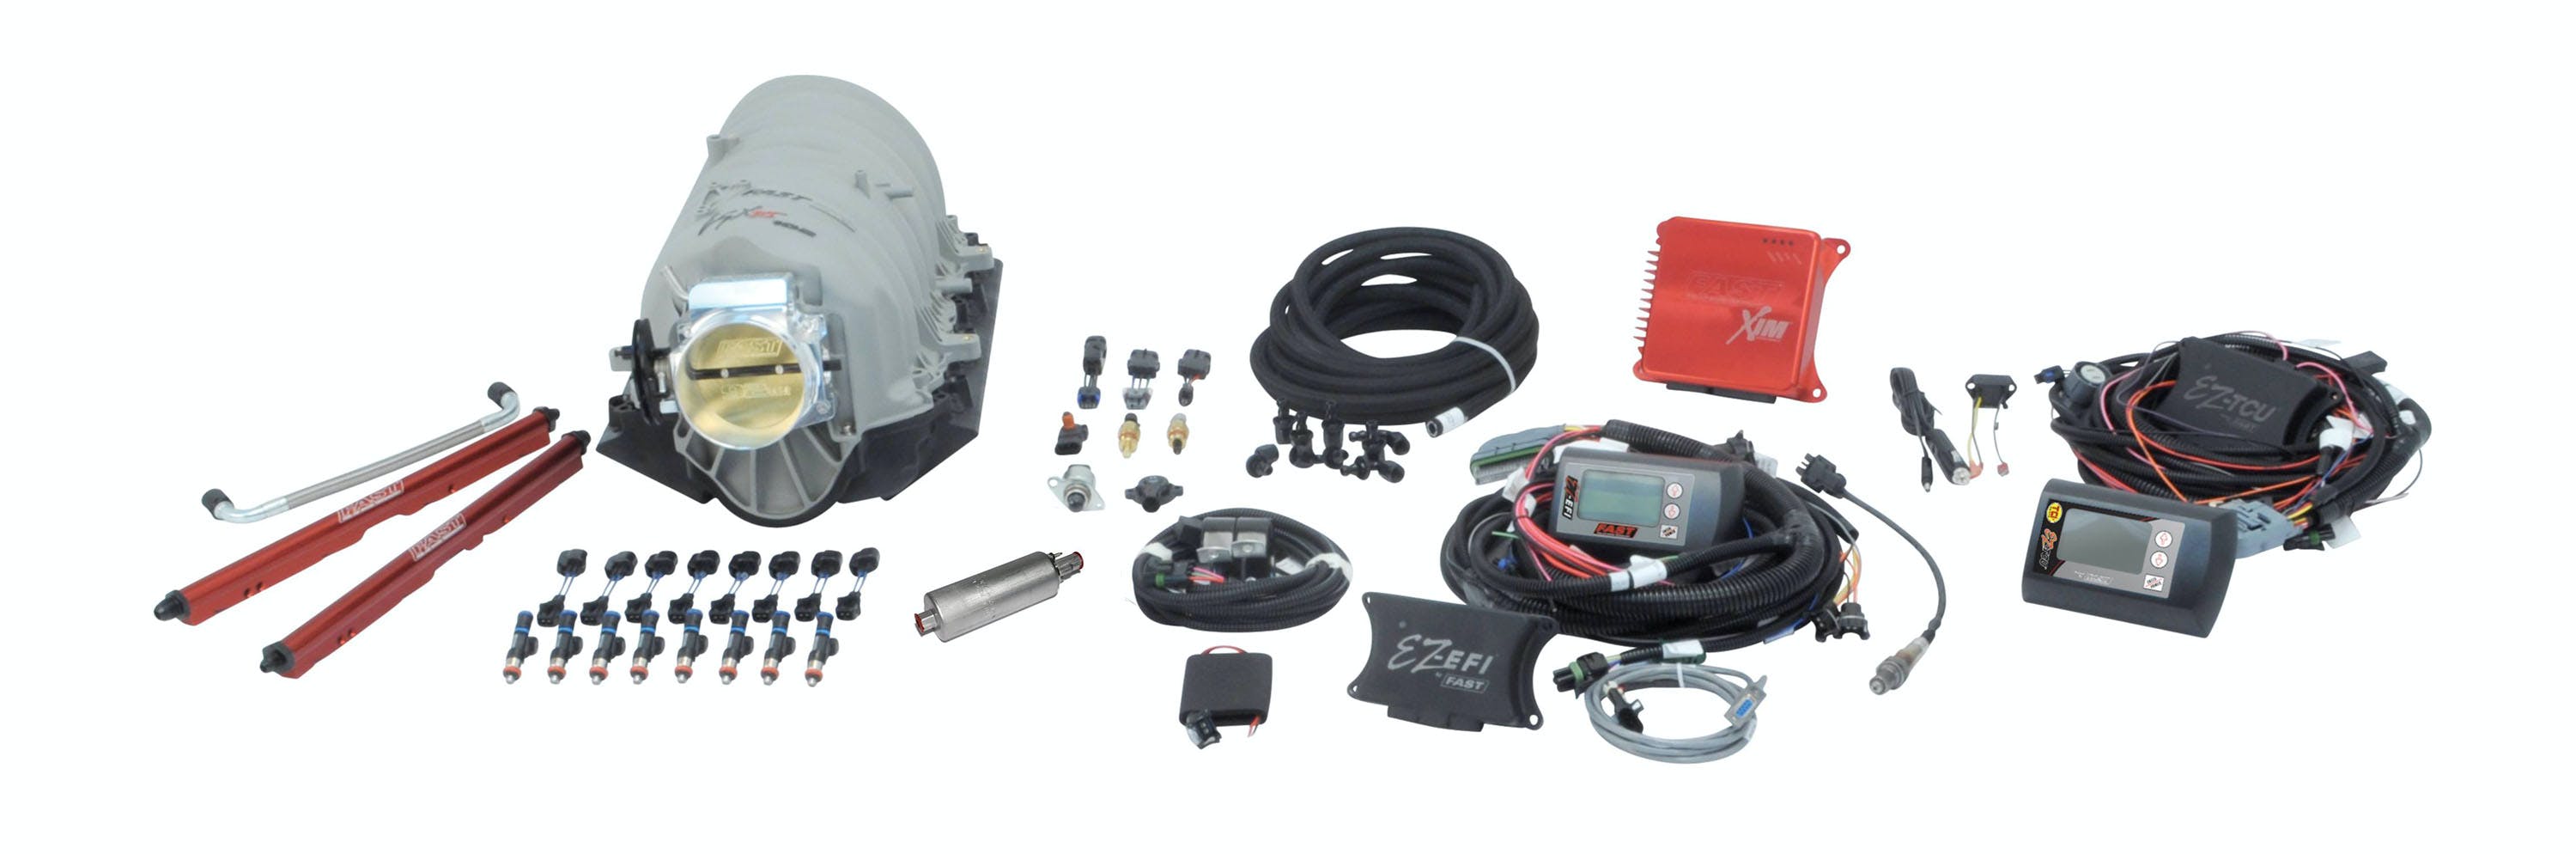 FAST - Fuel Air Spark Technology 302003T-TCU EZ-EFI? Engine and Manifold Kit w/ TCU and In-Tank Fuel Pump